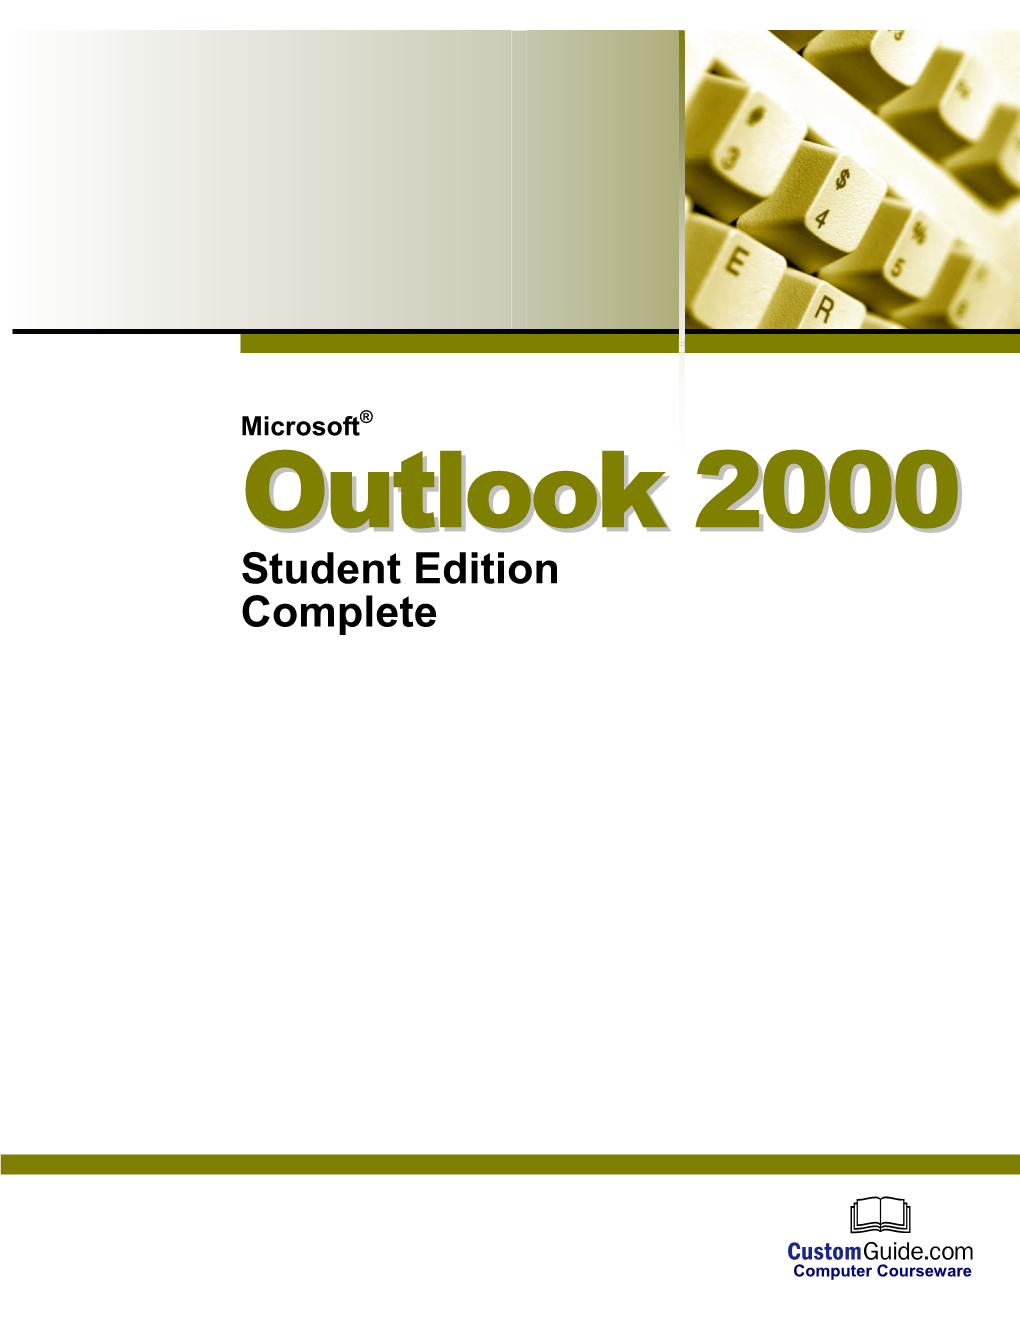 Outlook 2000?